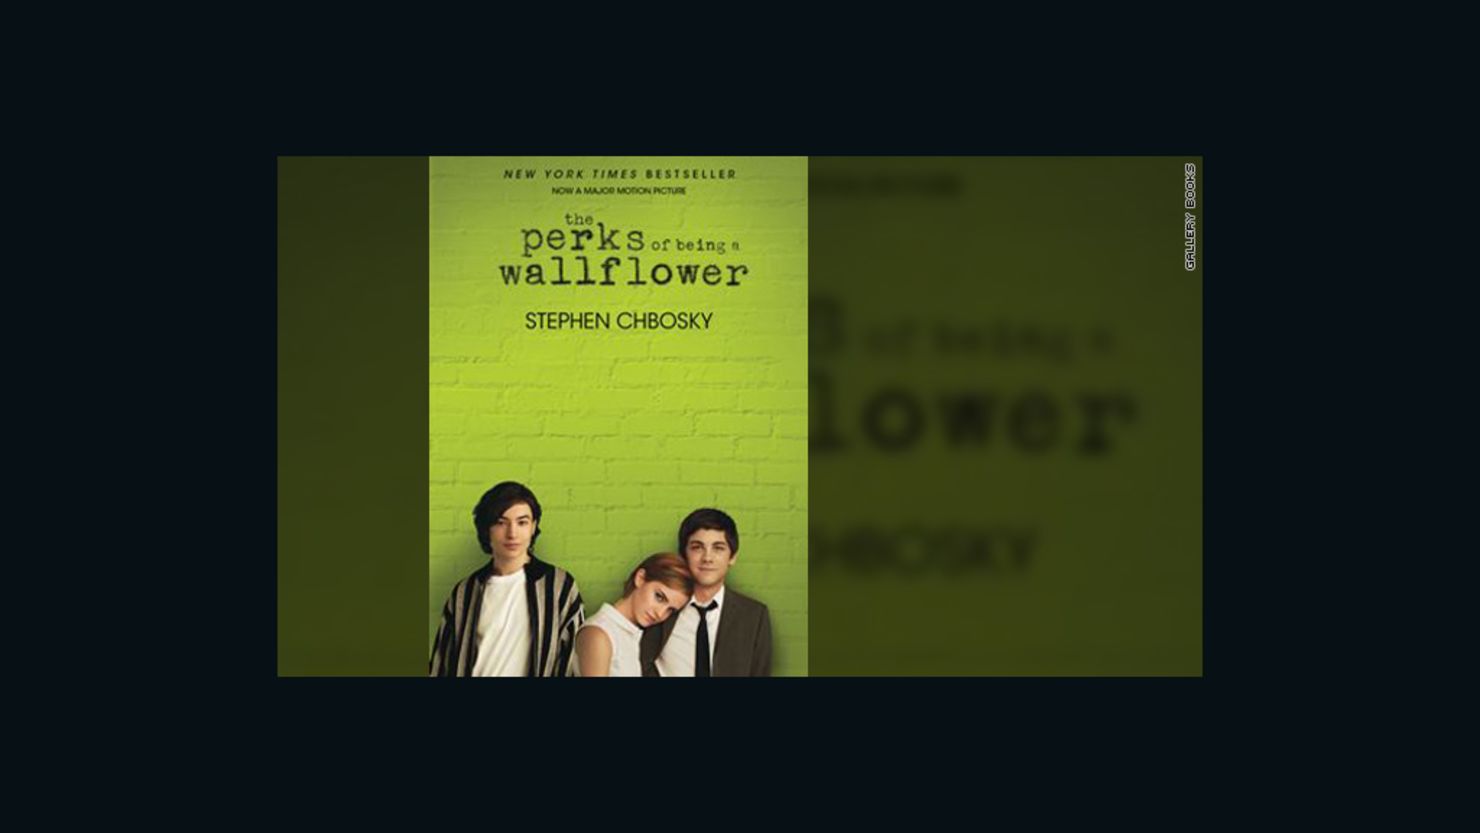 Film - The Perks of Being a Wallflower - Into Film